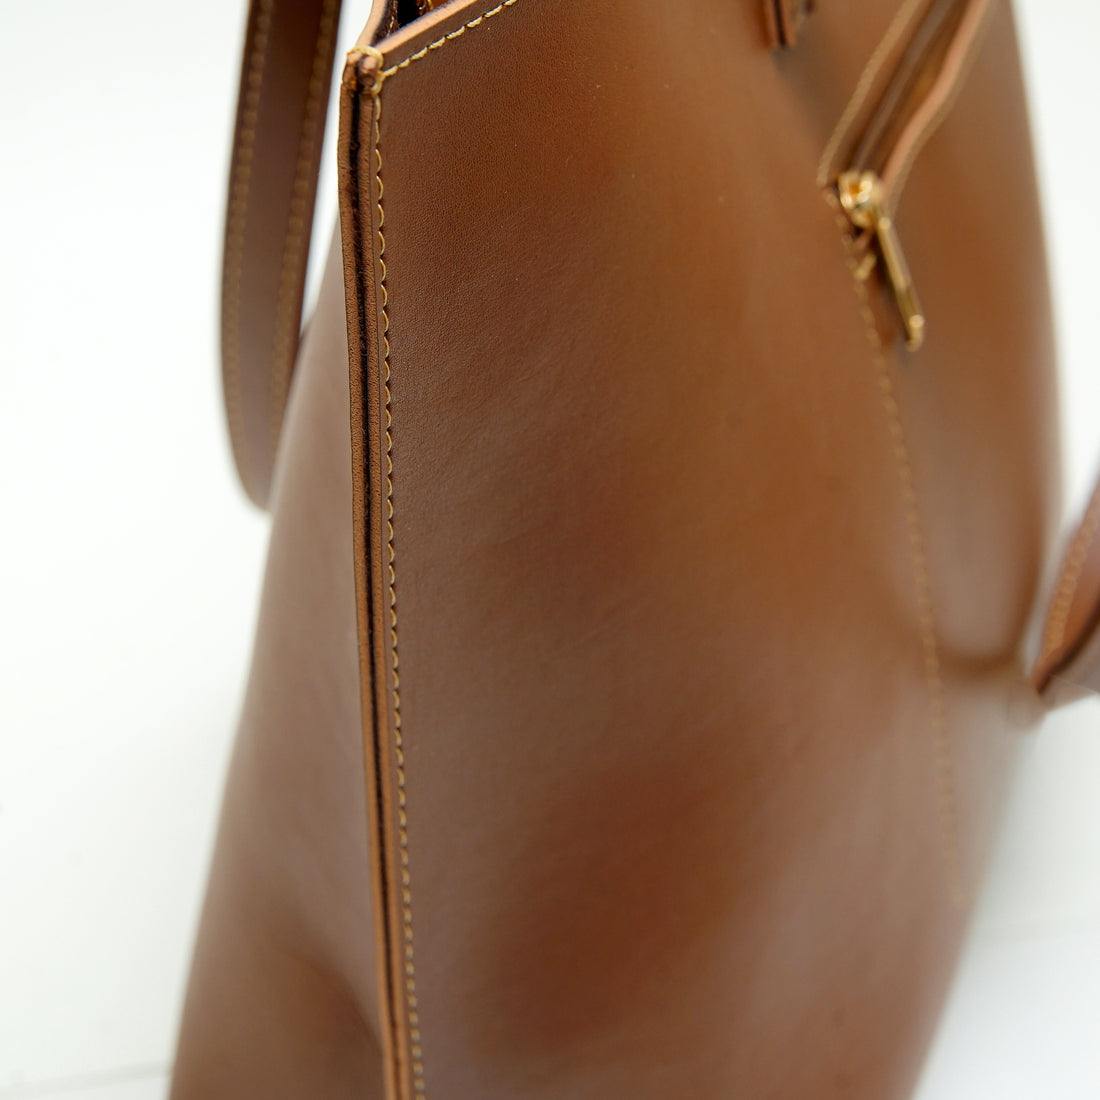 Horse Brown Zippered Tote Bag